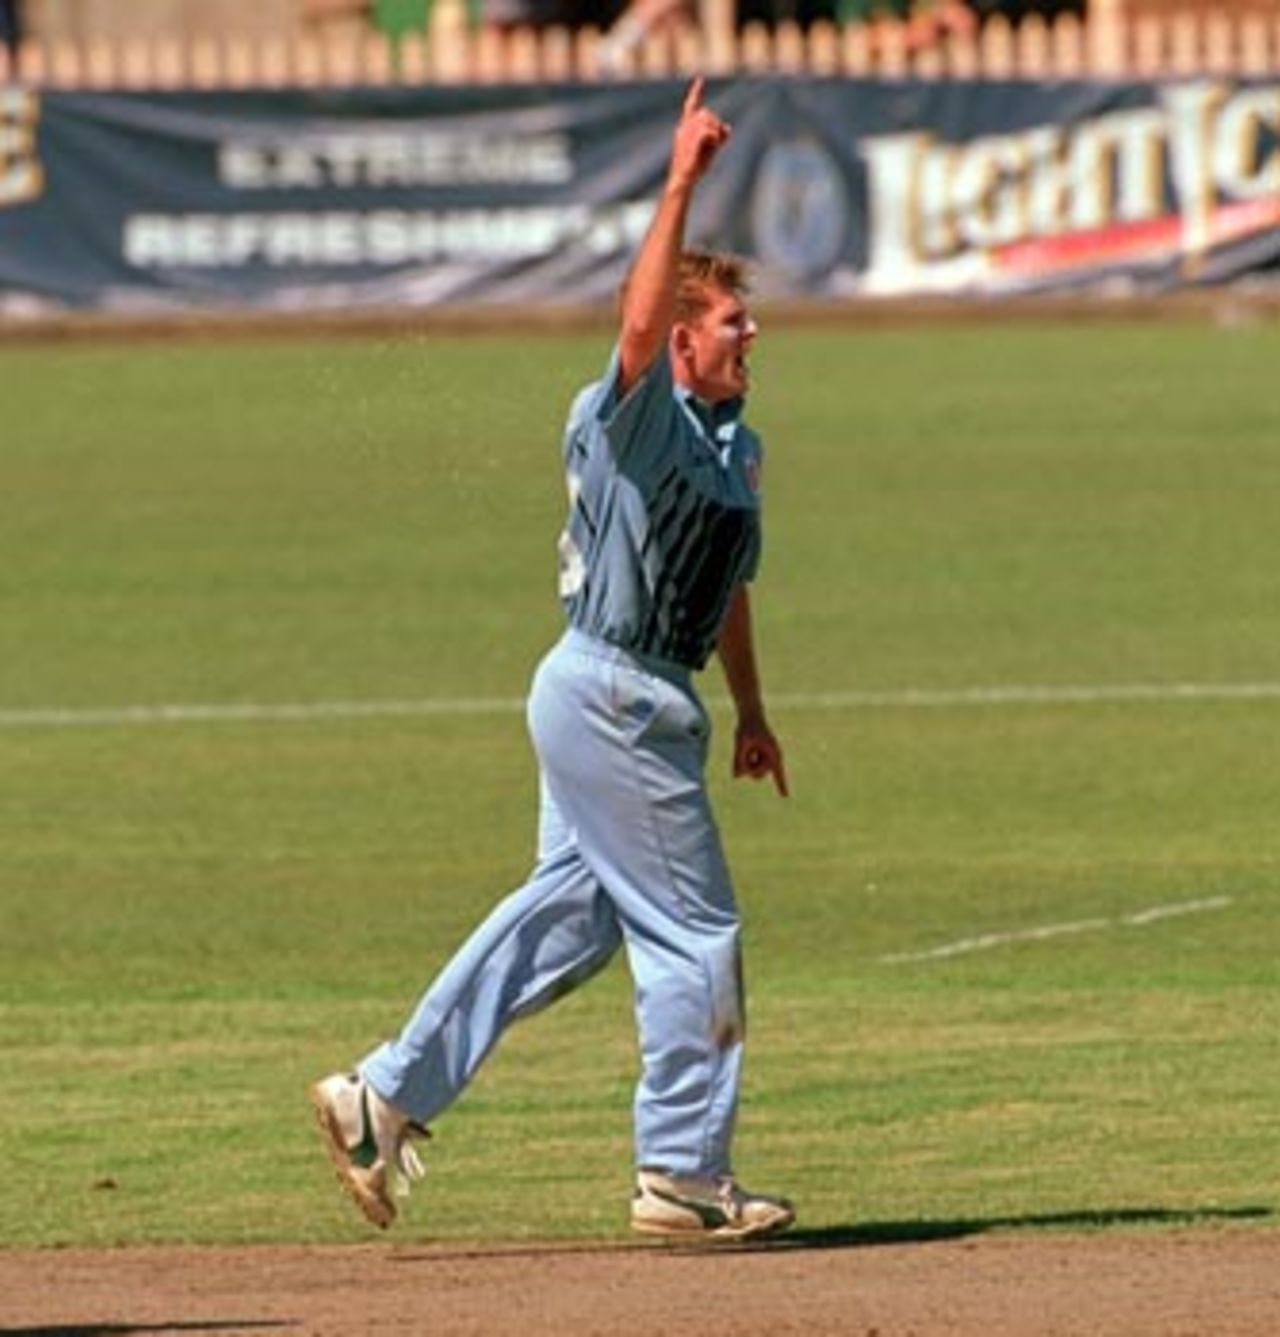 Shawn Bradstreet celebrates during the Mercantile Mutual Cup match between New South Wales and Queensland at North Sydney Oval on 4th October 1998.